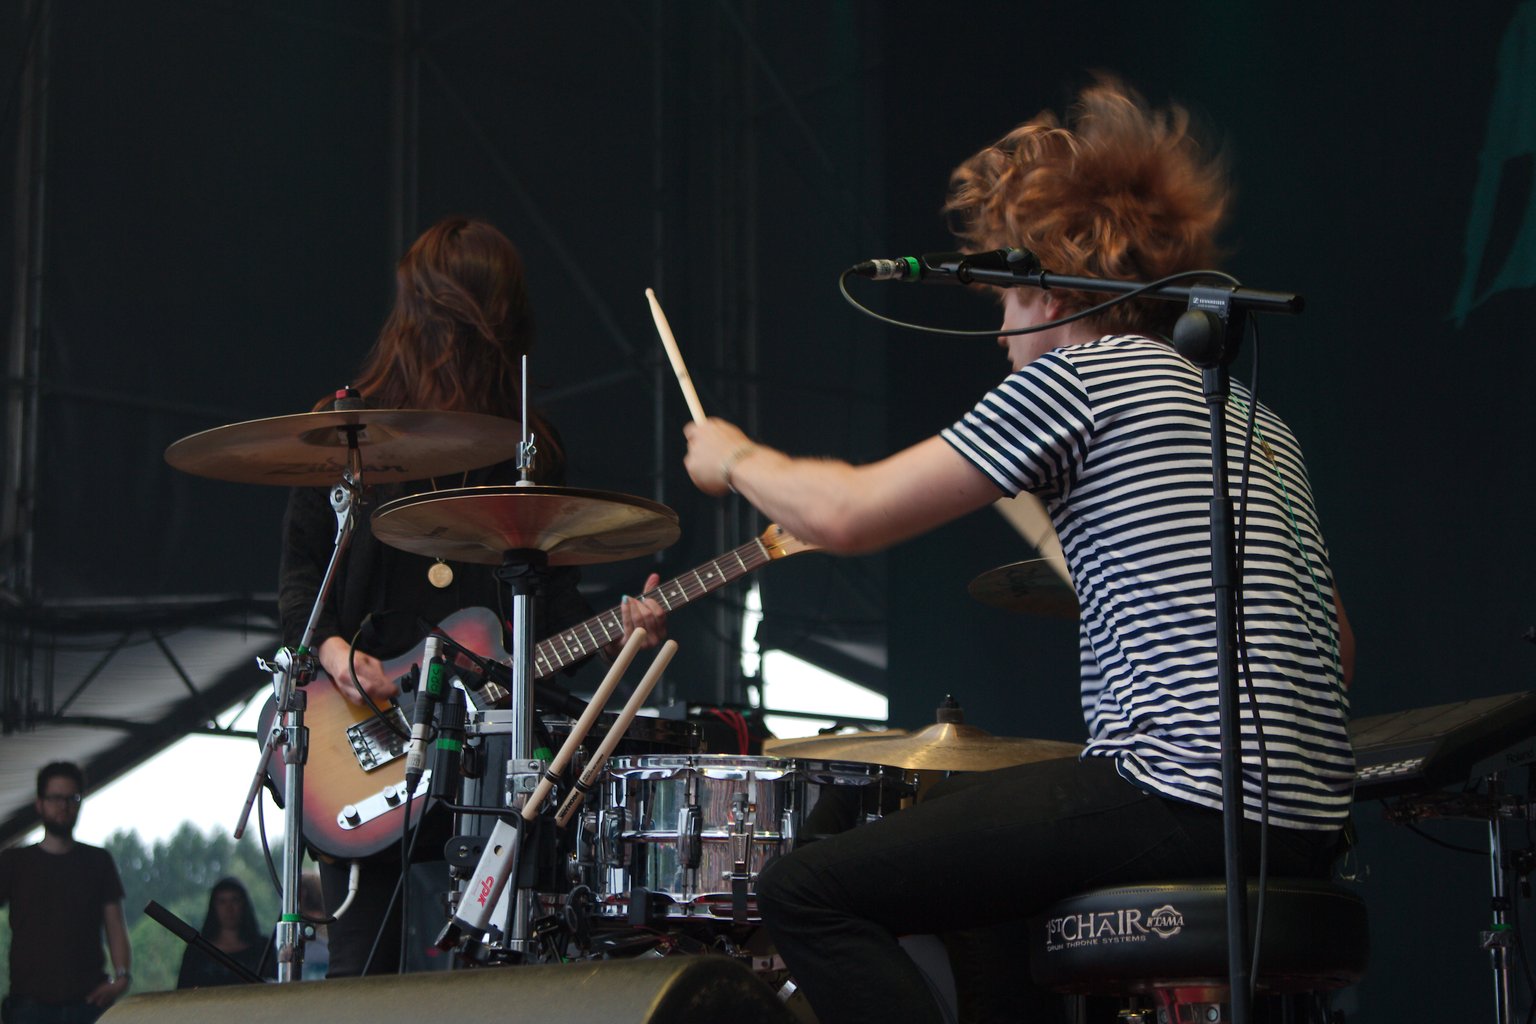 Blood Red Shoes' drummer Steven Ansell and guitarist Laura-Mary Carter both have their hair flying around from fast movement